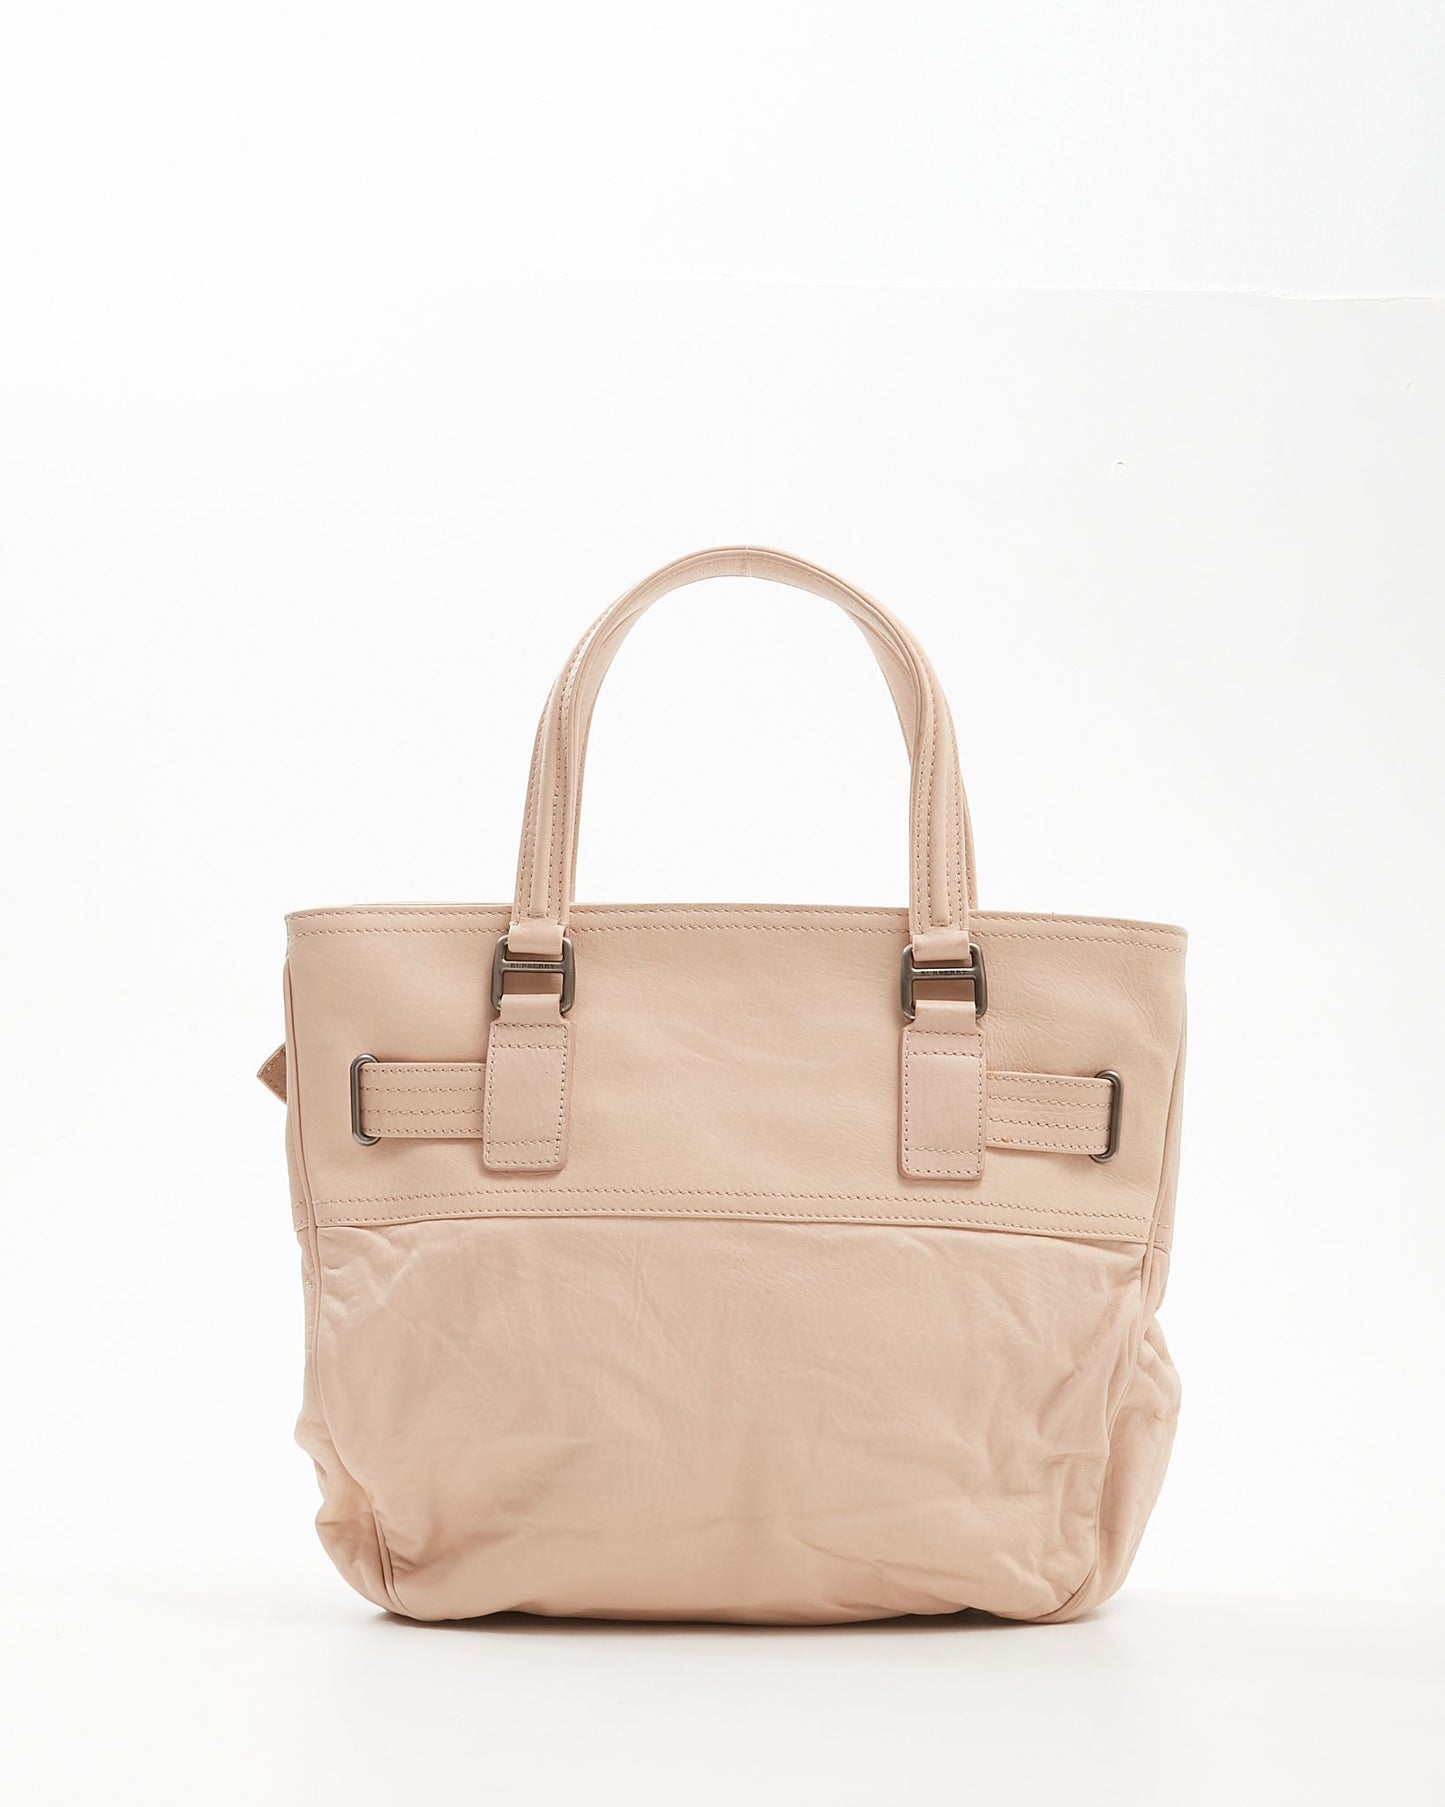 Burberry Beige Leather Tote